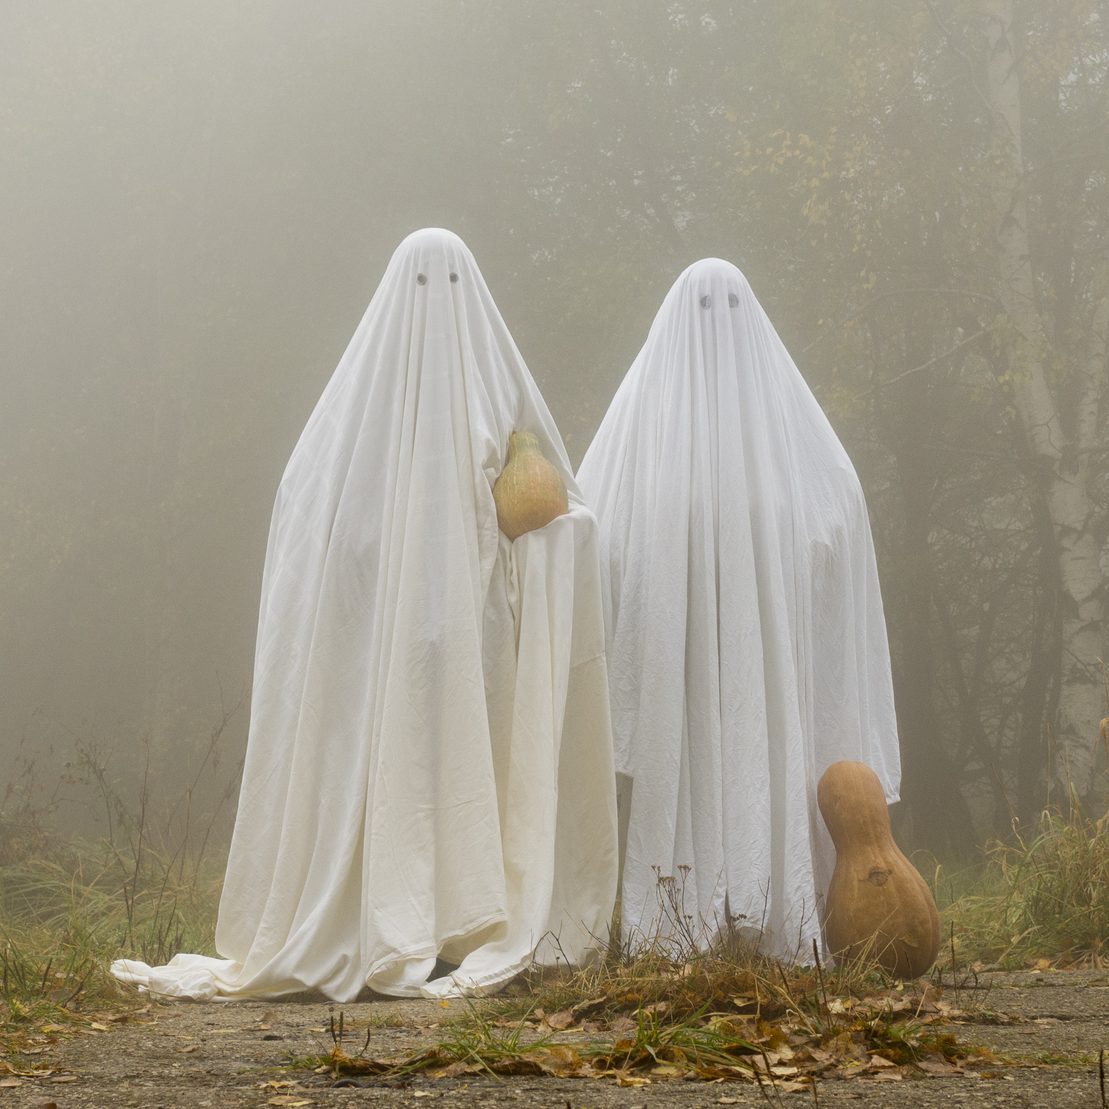 Two scary ghost halloween costumes in the woods